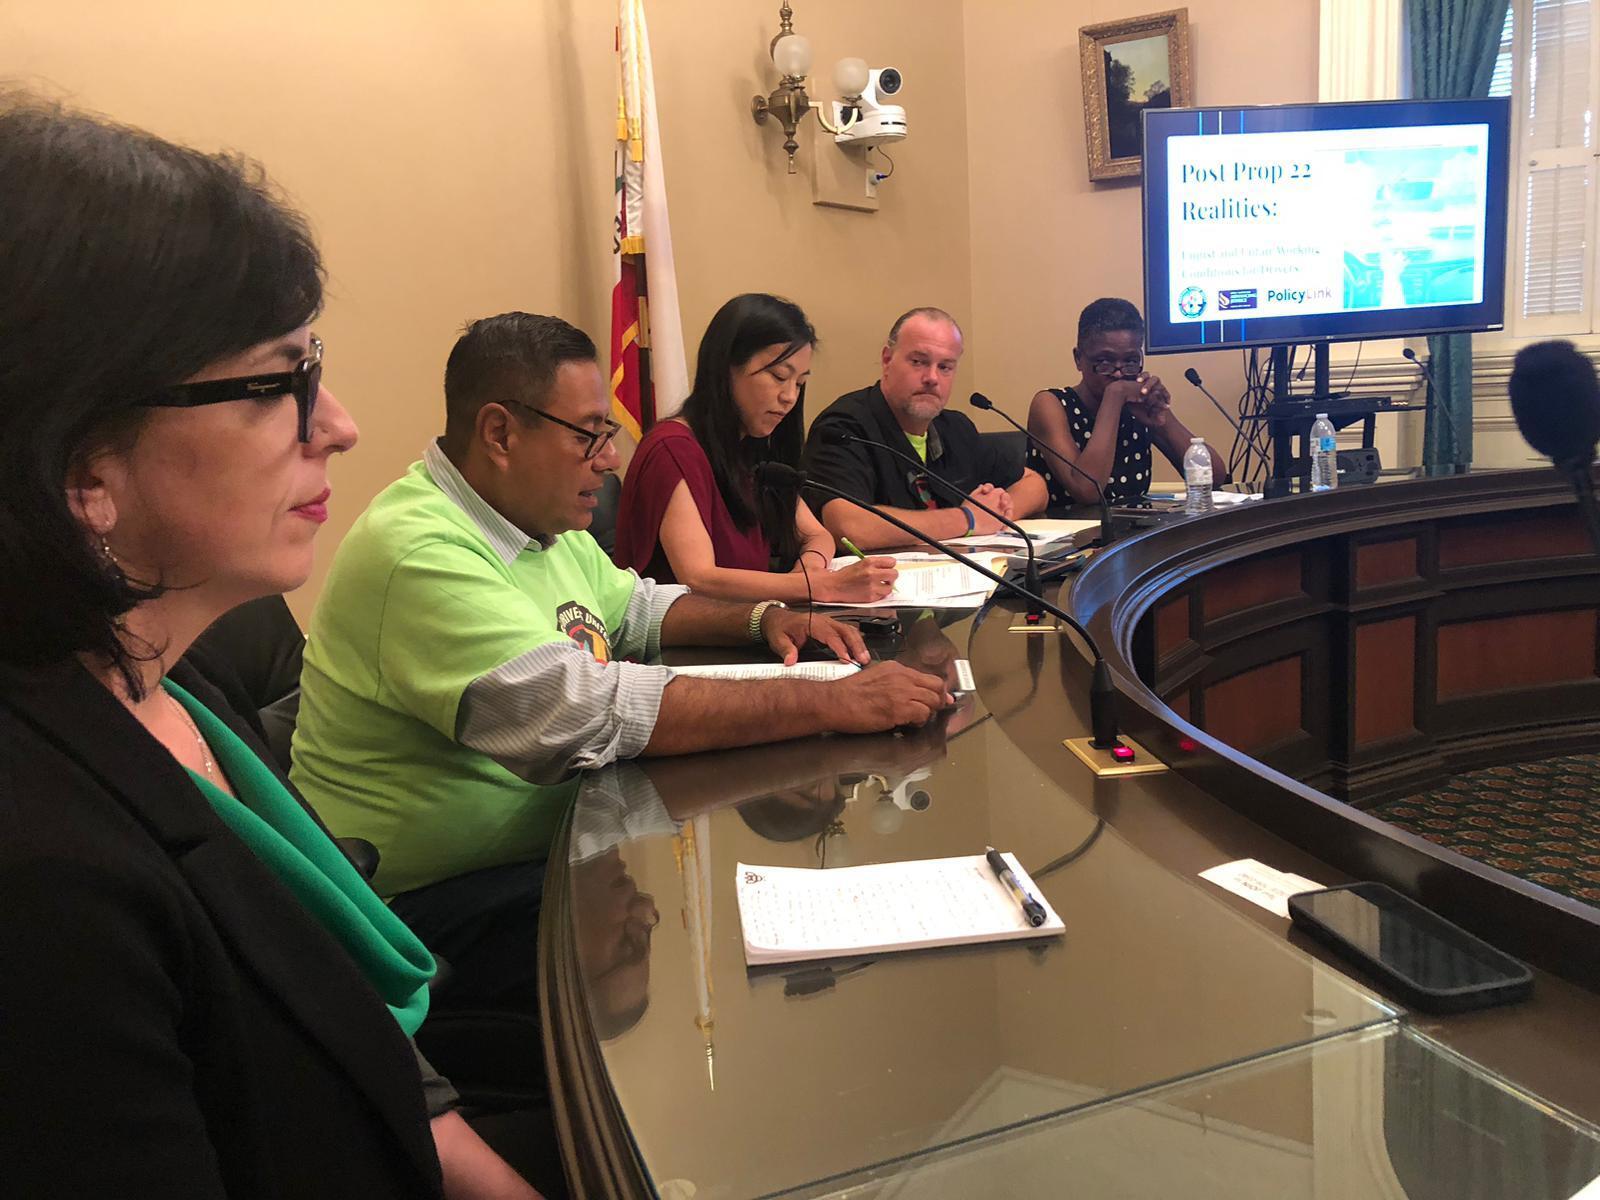 Uber and Lyft drivers, Rideshare Drivers United, PolicyLink, and Asian Law Caucus brief state legislators on the impacts of Prop 22 and how California can strengthen drivers' job security and safety.